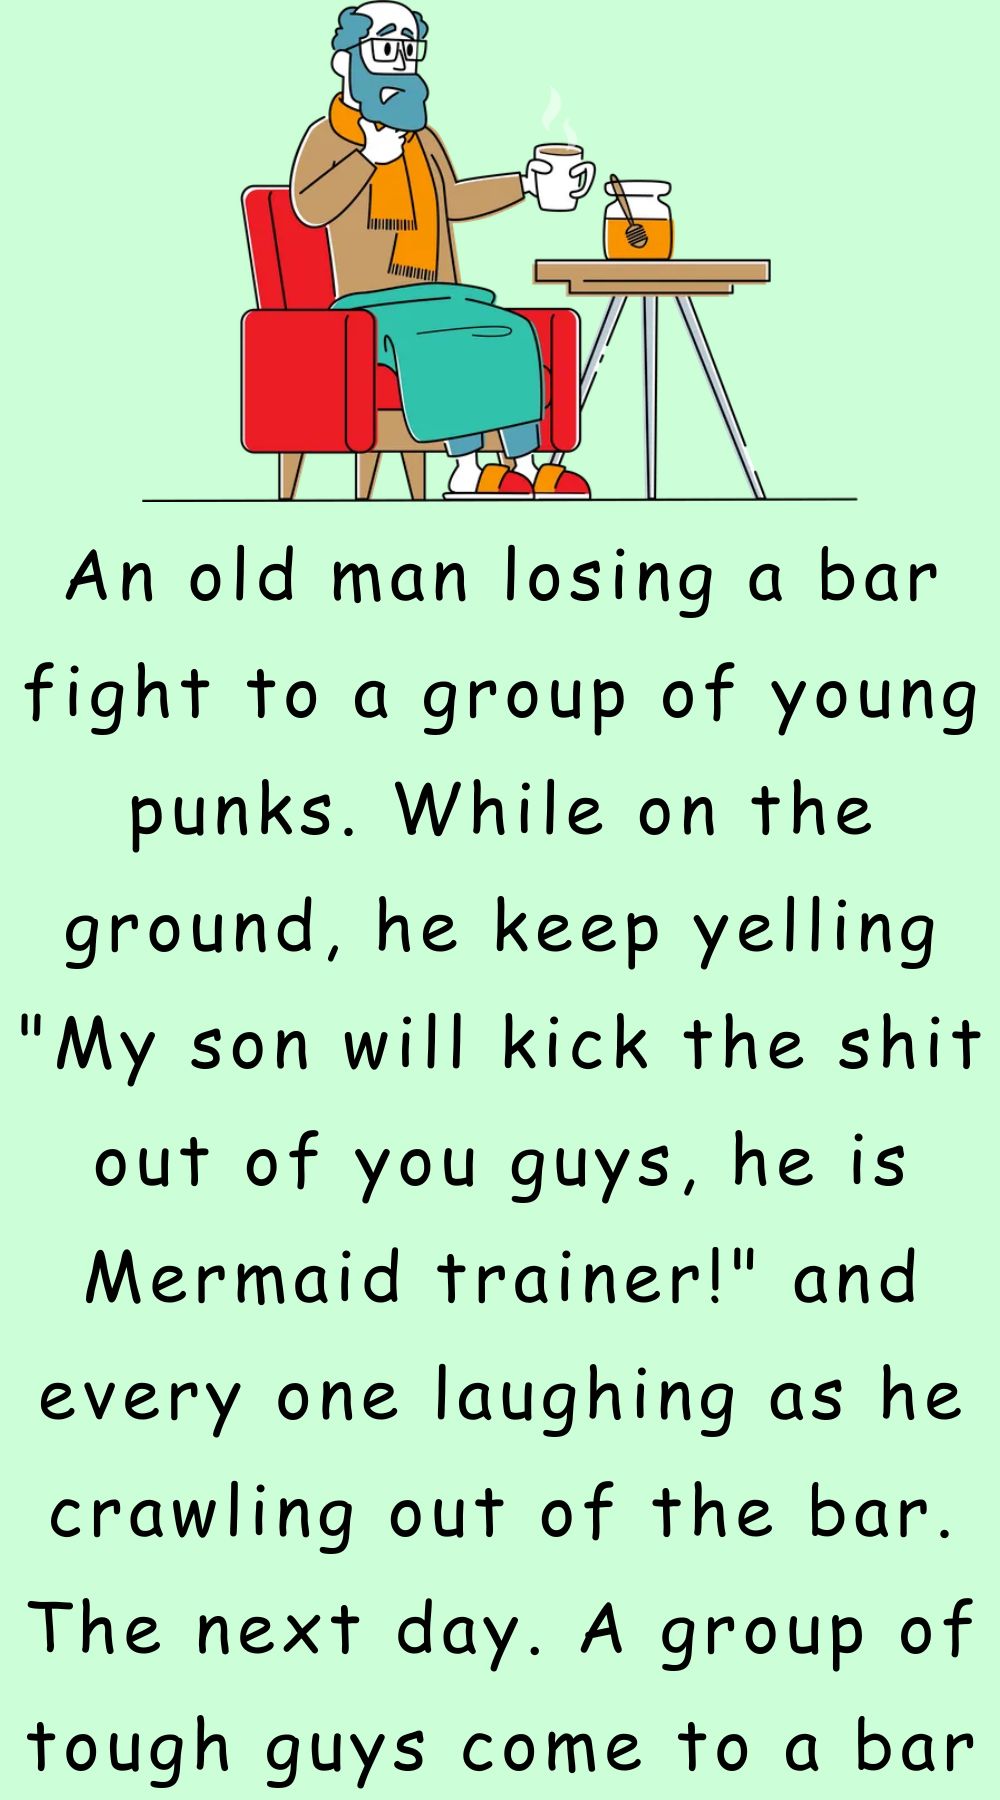 An old man losing a bar fight